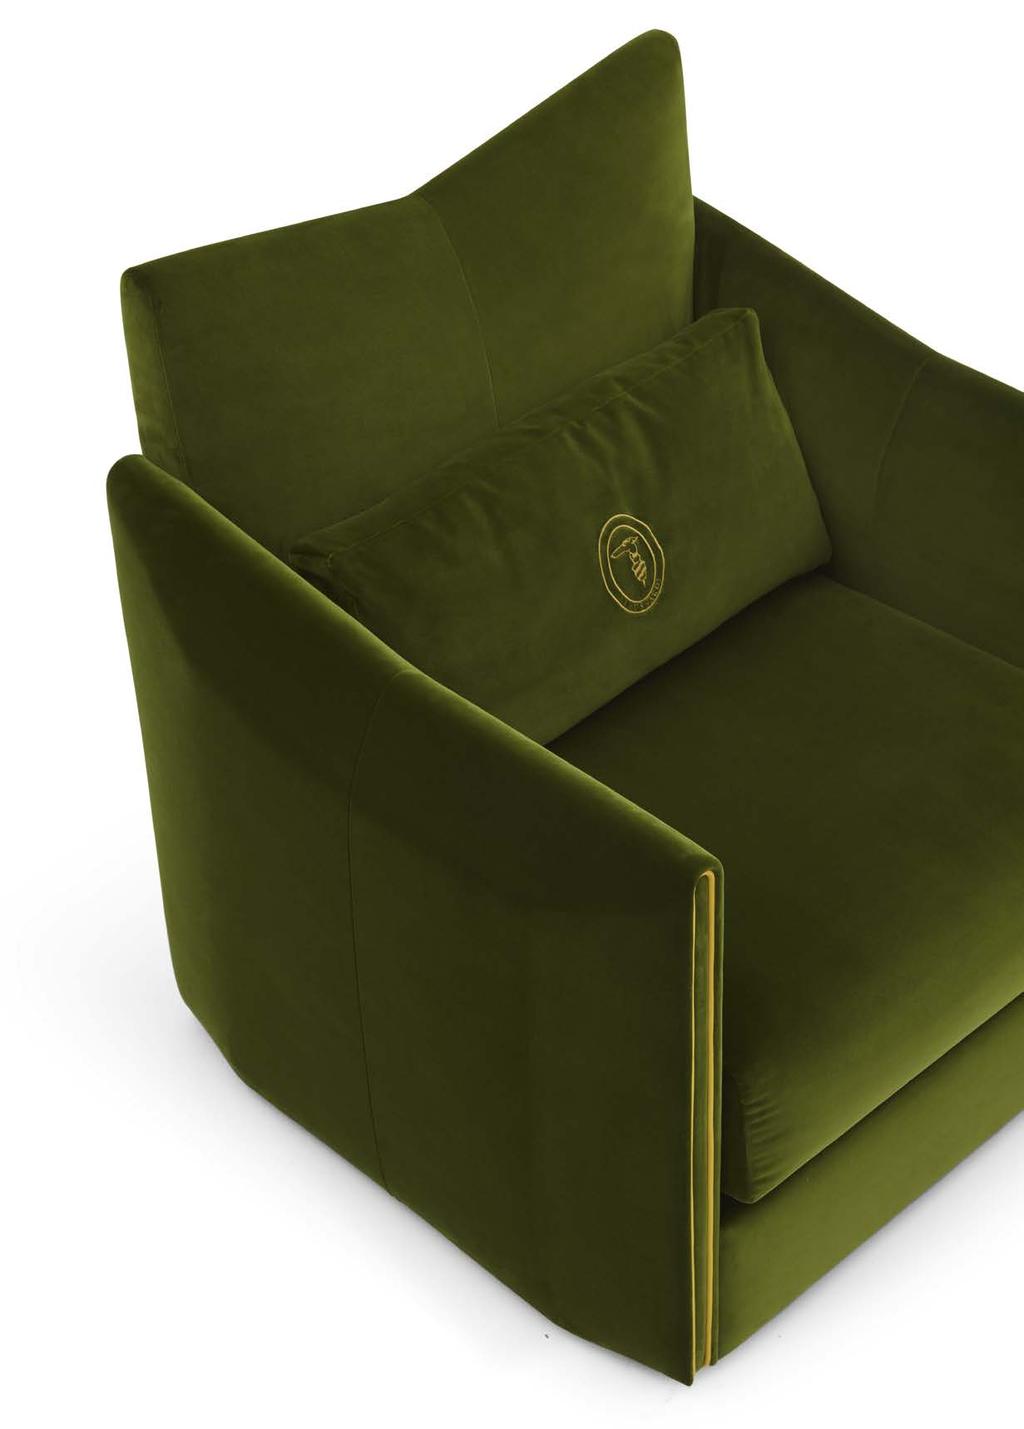 18 MARYL BERGERE Armchair, DLS (POL2) Bisanzio C 051 cover with Nuvola Extra 192 leather piping,